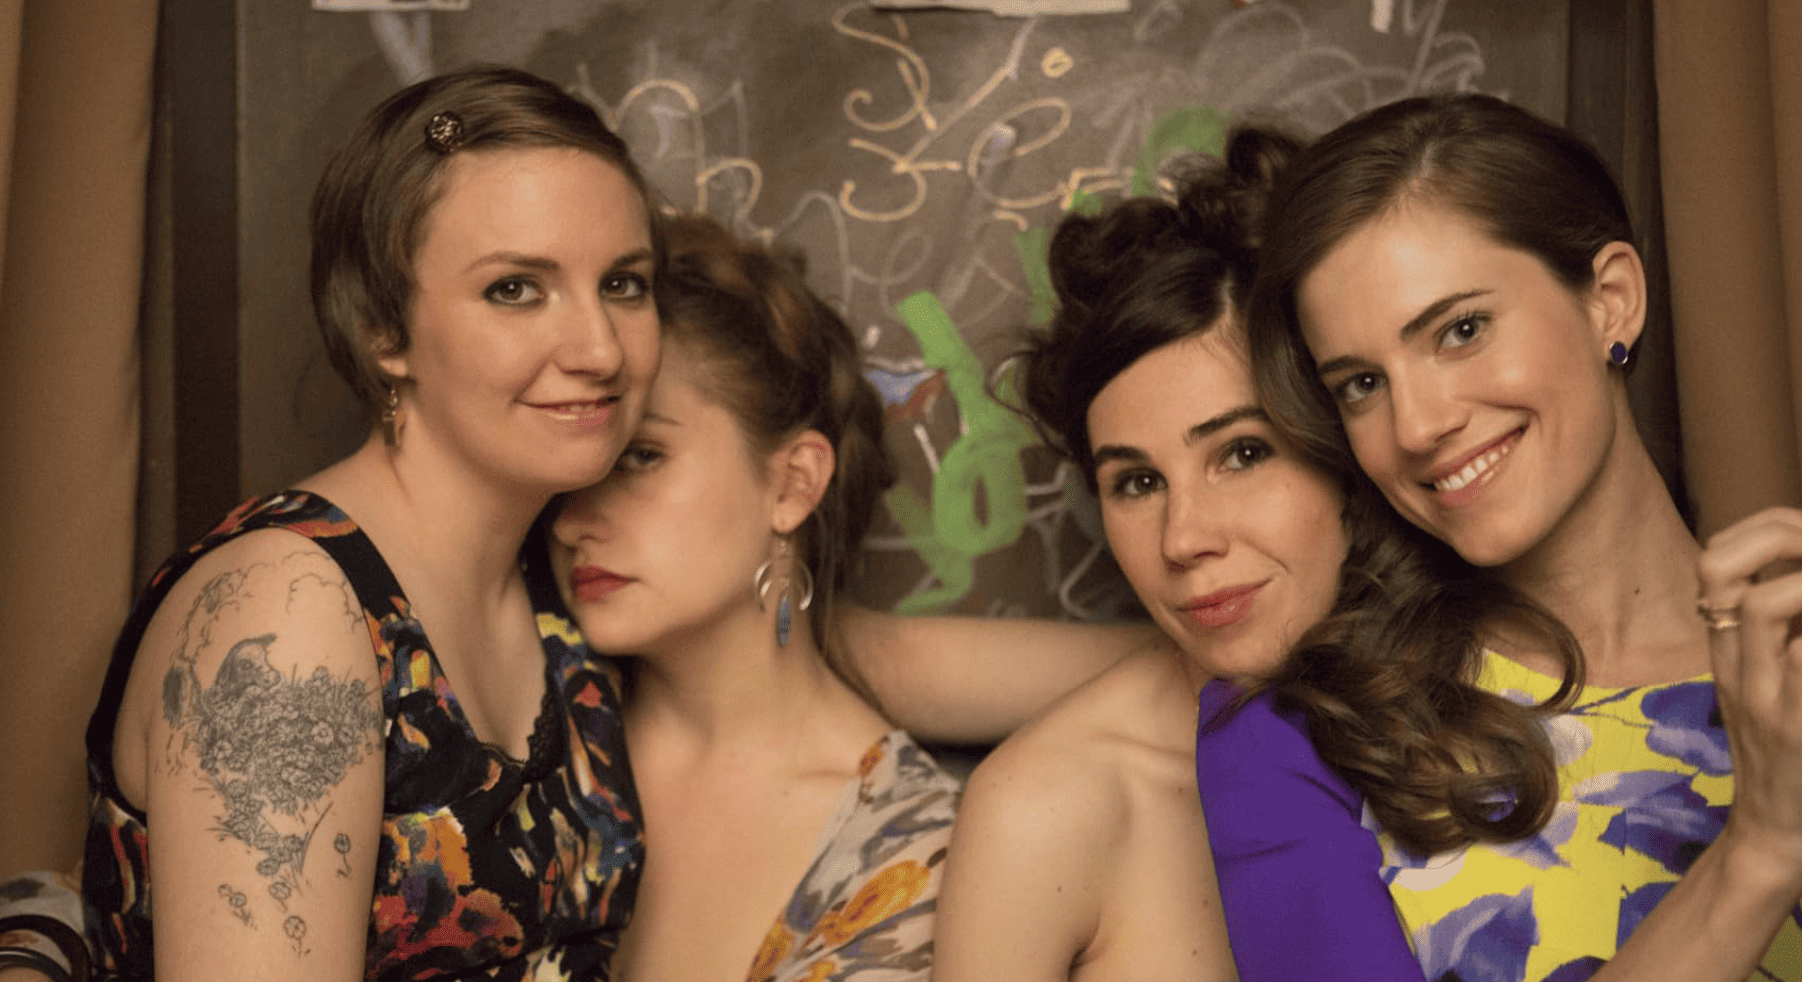 Imagining the Cast of ‘Girls’ as Gen Z Characters